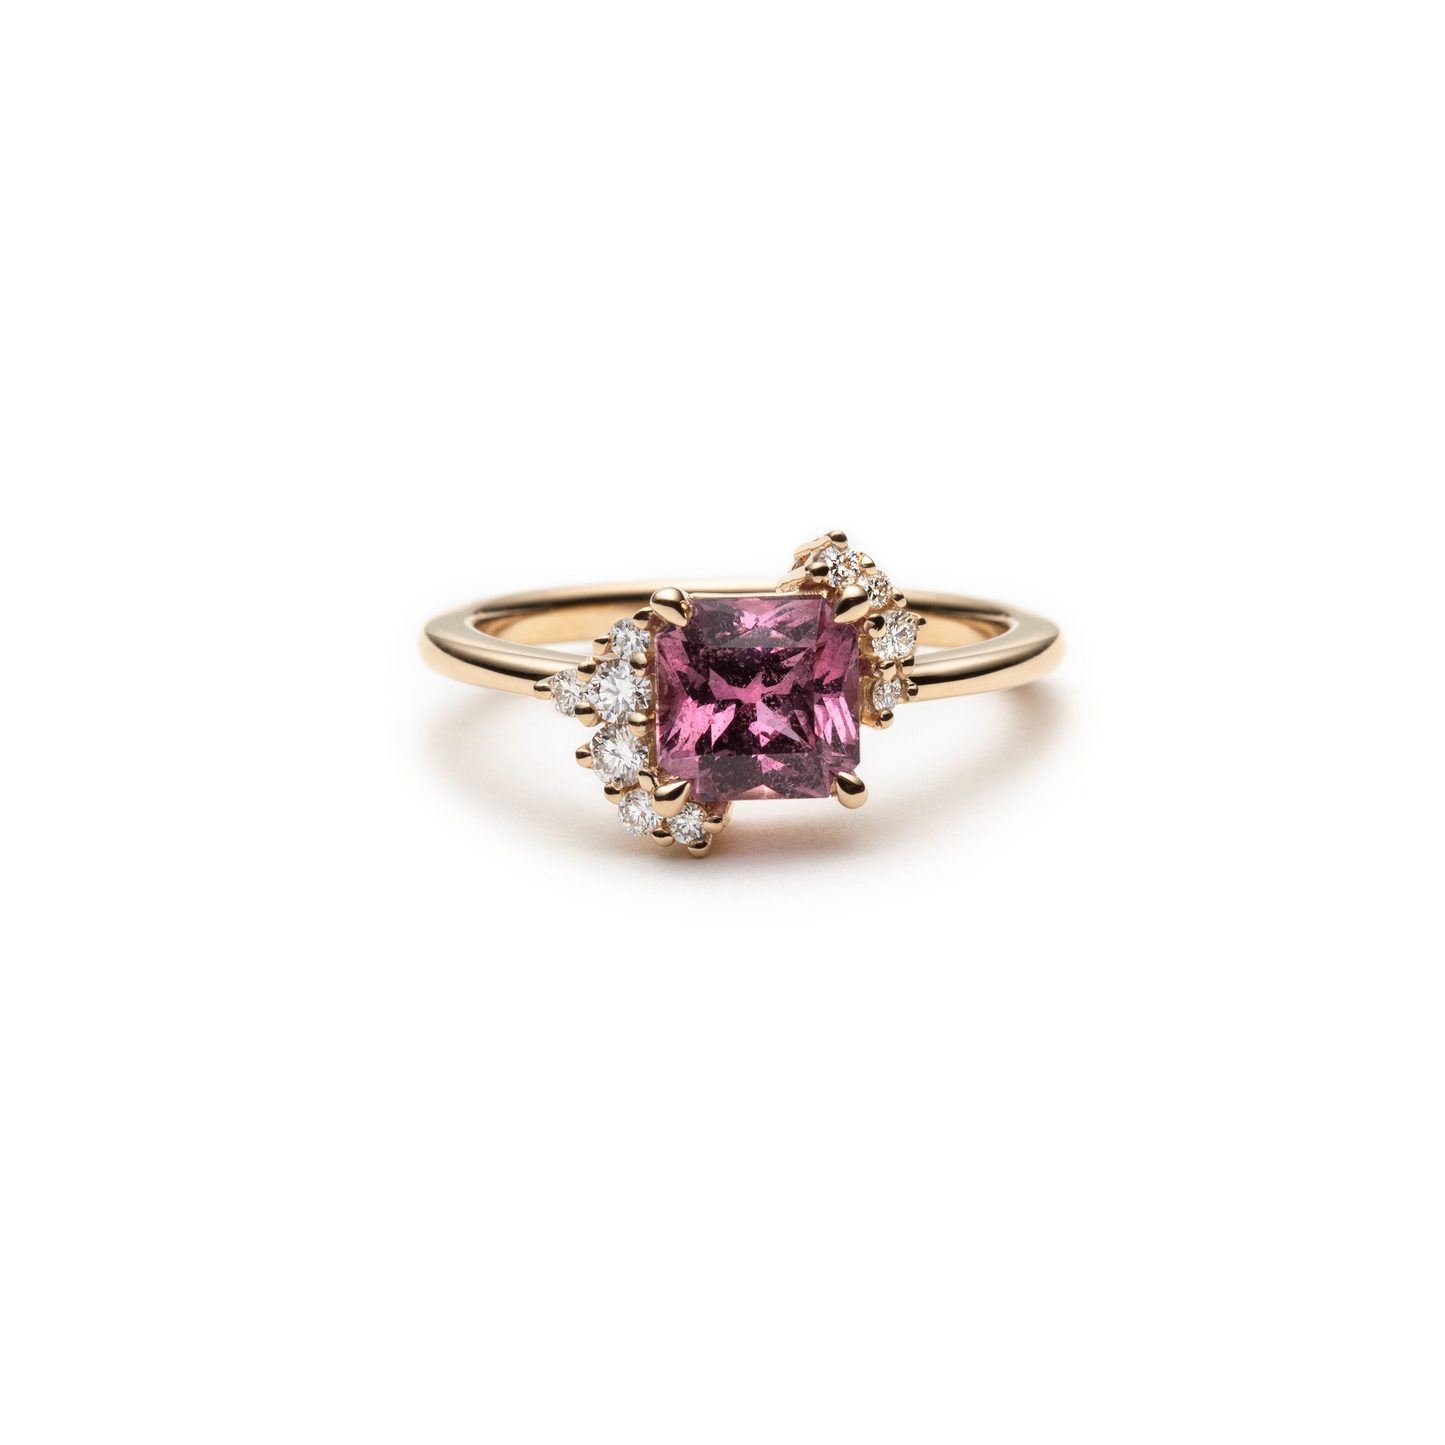 One of a Kind Bright Pink Radiant Cut Sapphire and Diamond Asymmetric Ring